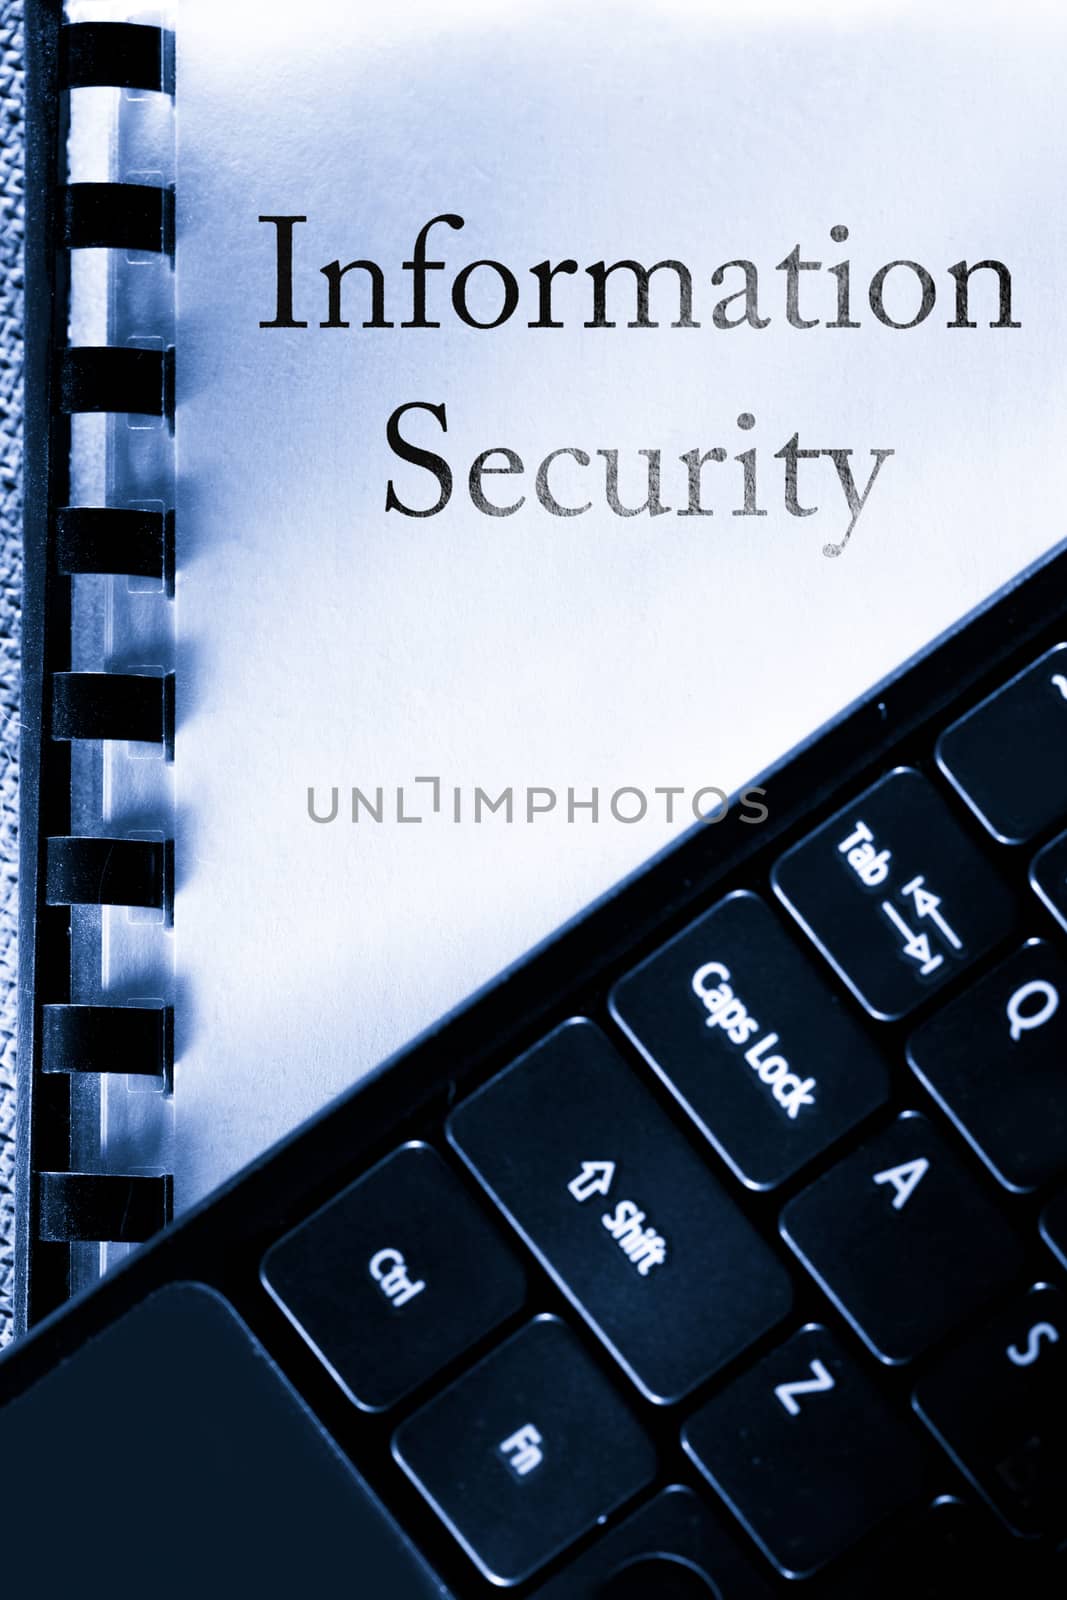 Information security with computer keyboard by Garsya